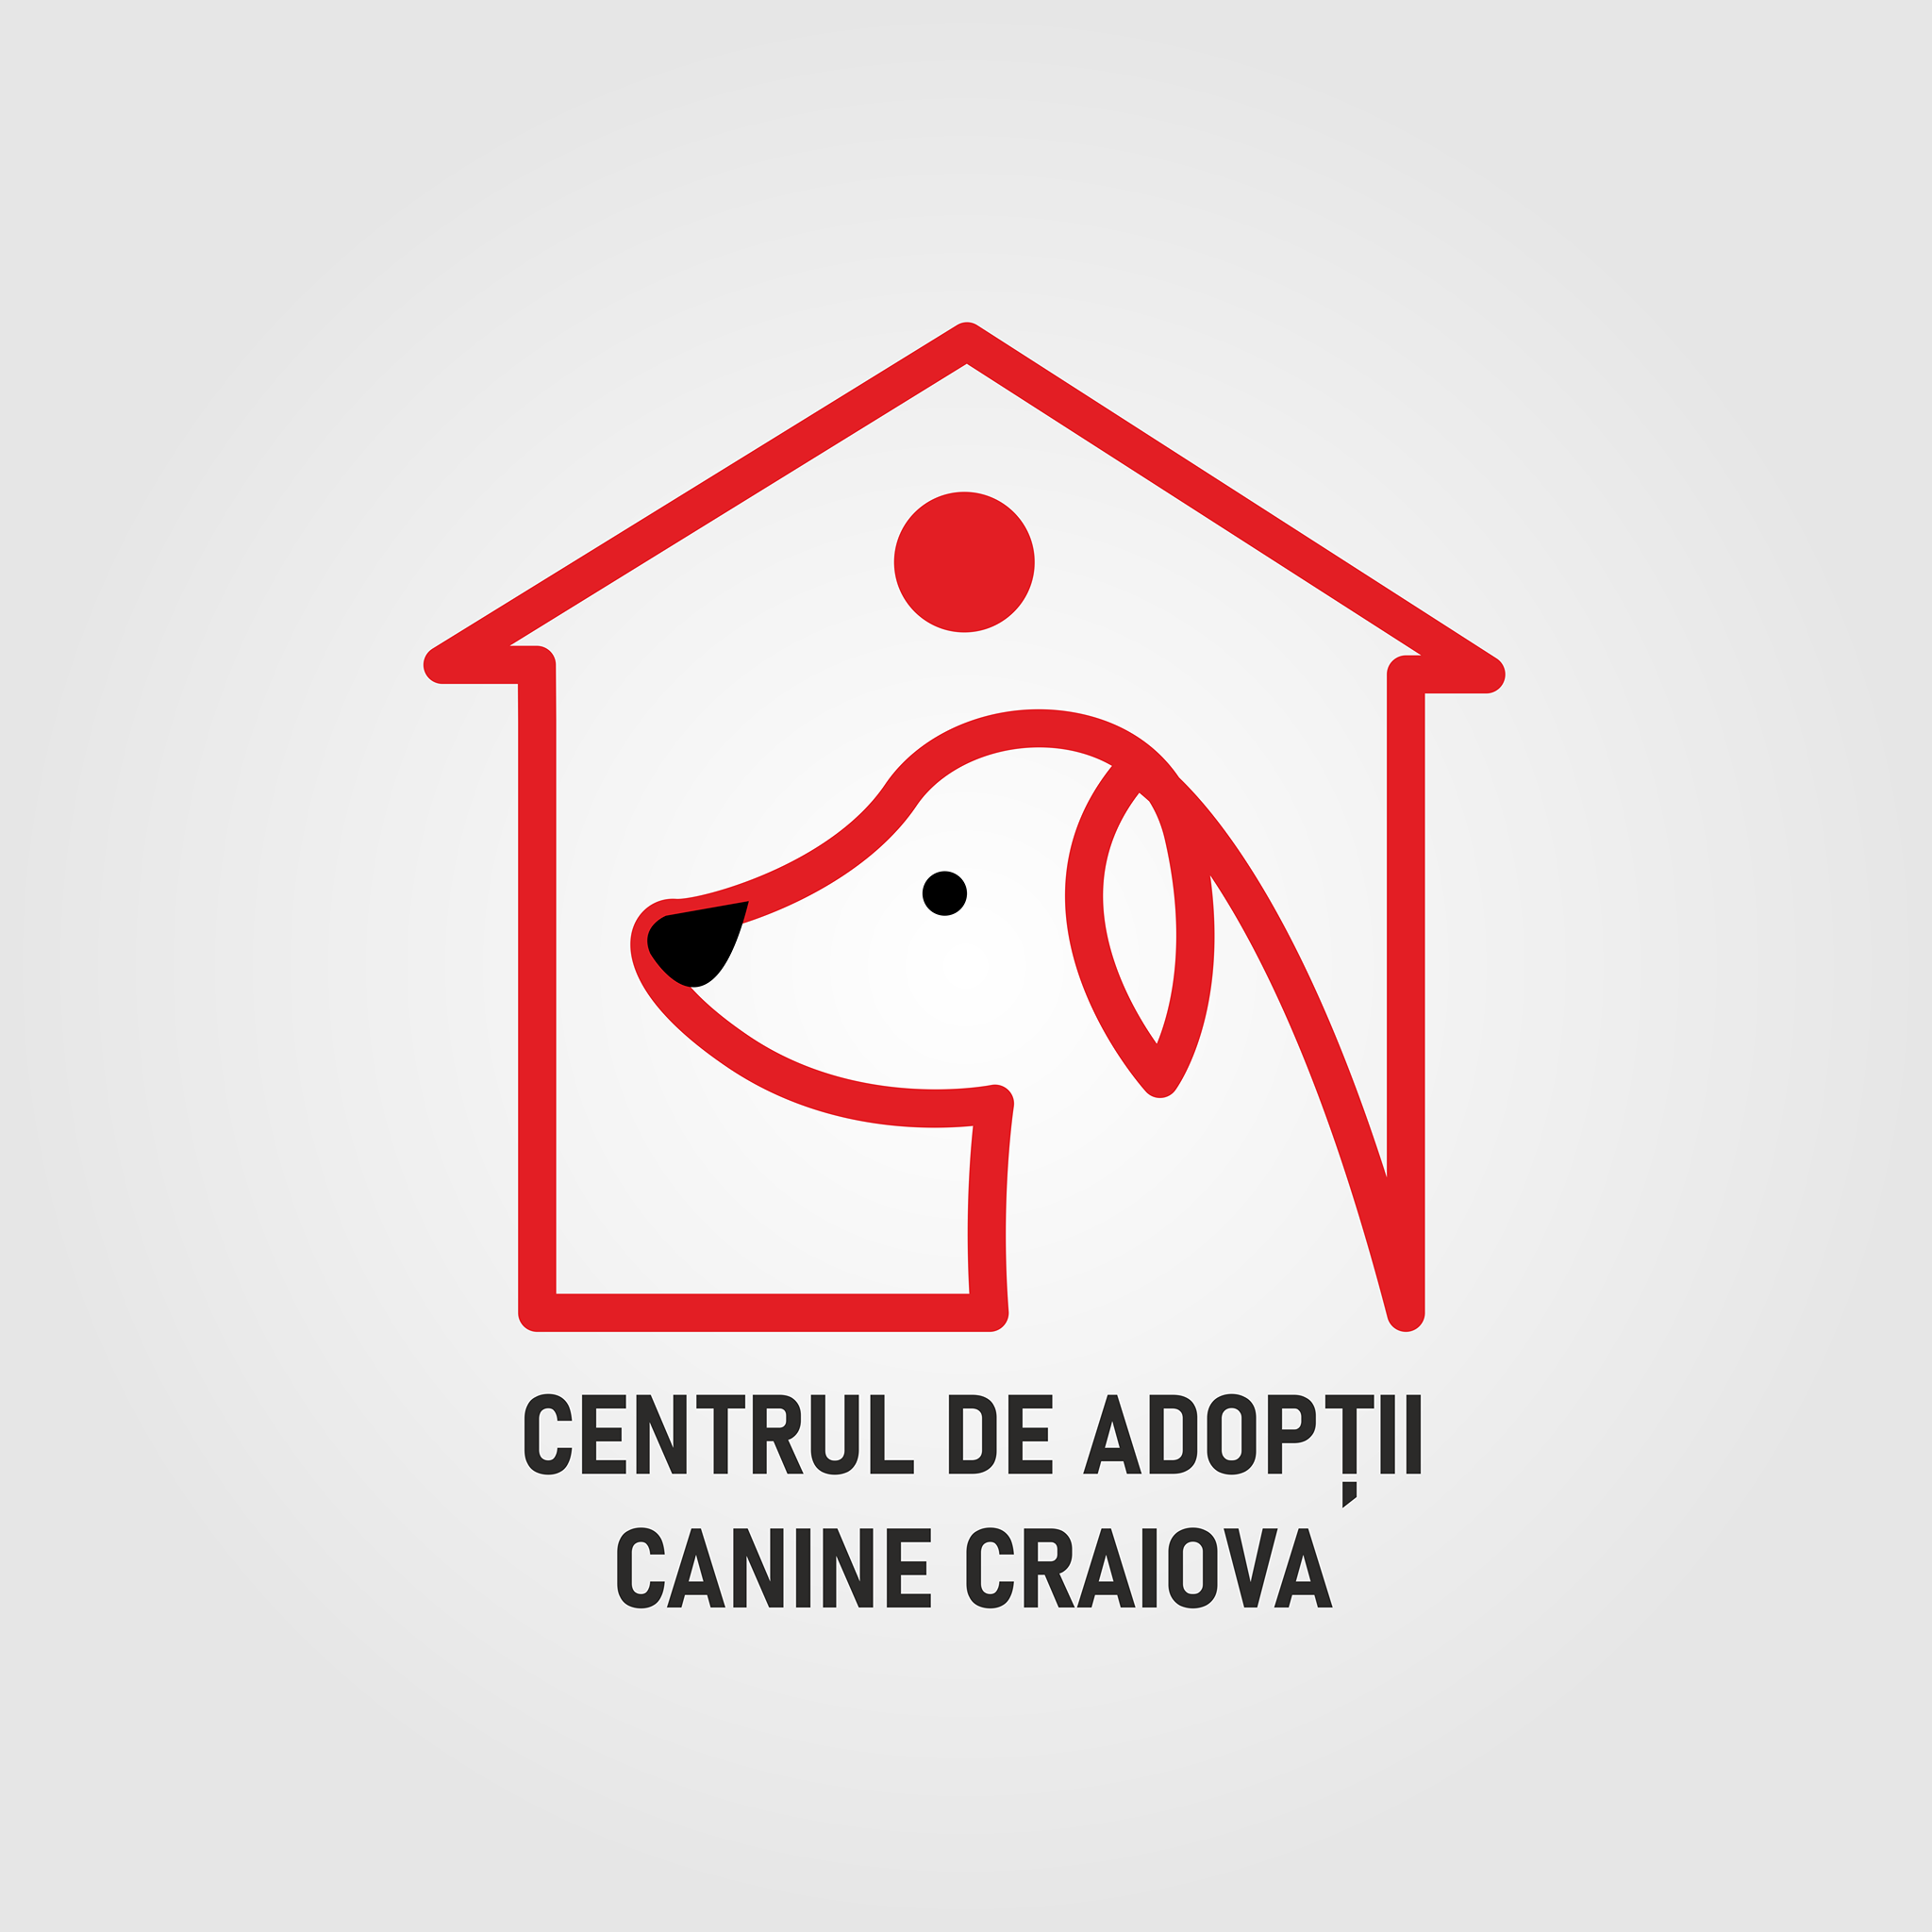 #CraiovaAdoptsHappiness. What surprises are the furbabies from the Craiova Dog Adoption Center preparing